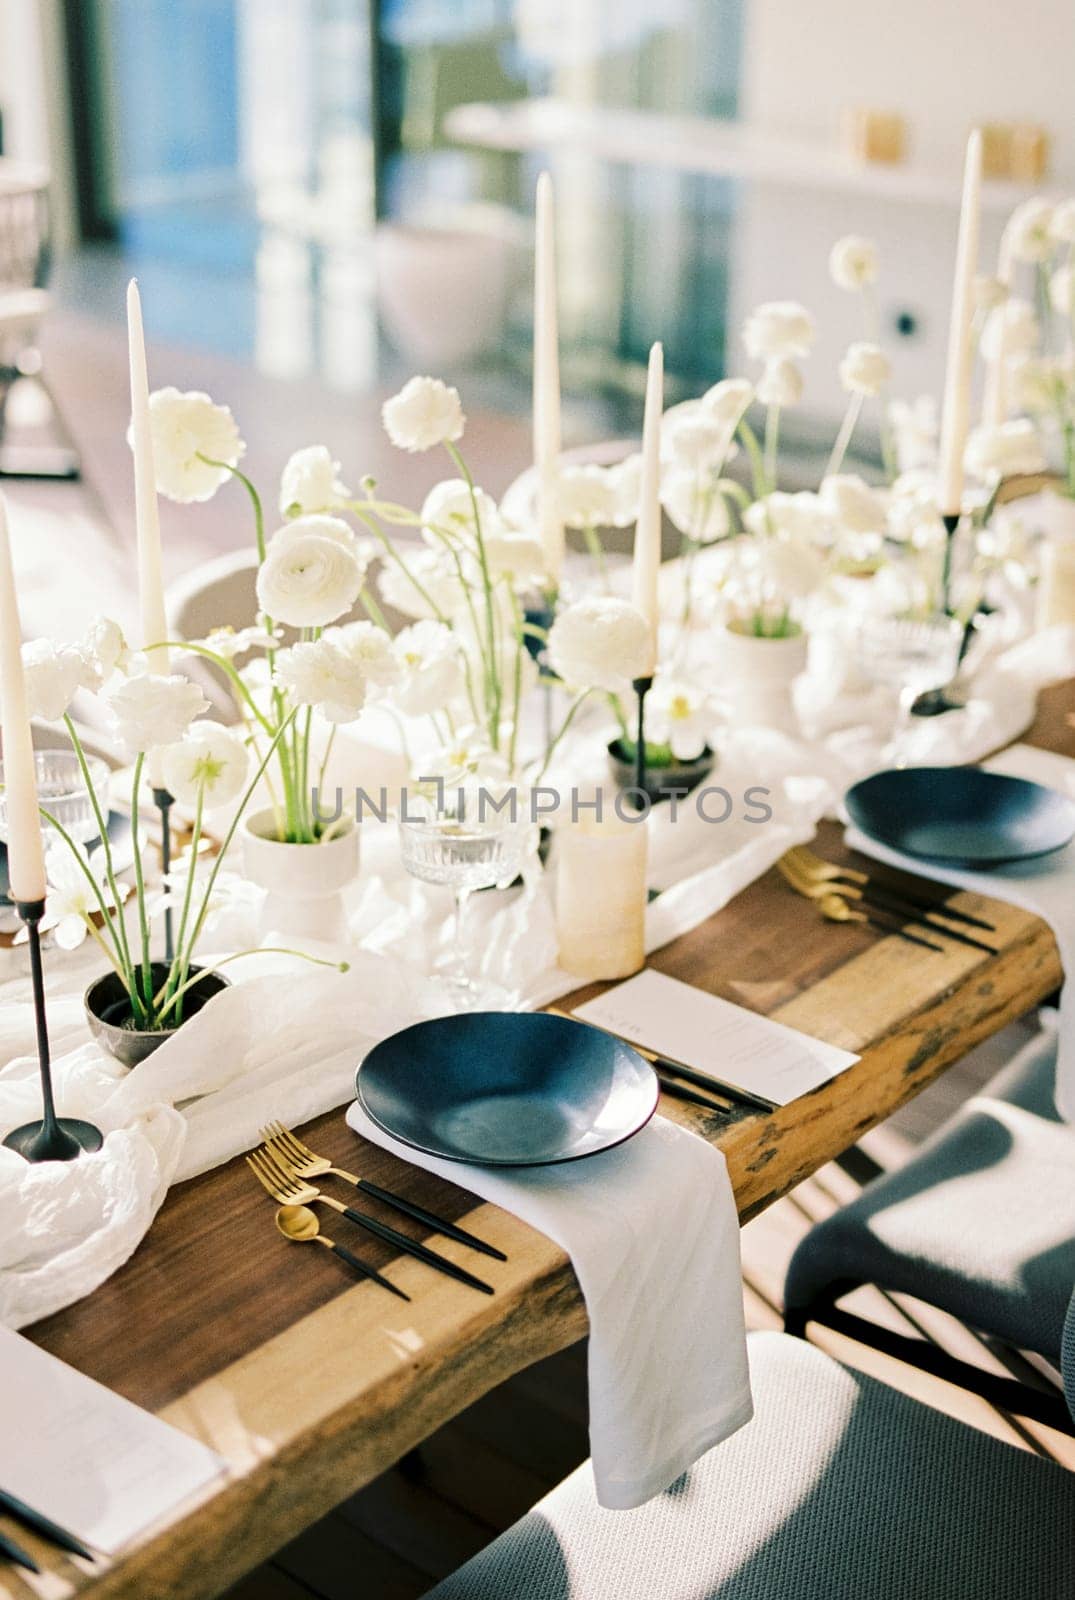 Black plates stand on a wooden table near white bouquets of flowers and candles on a narrow tablecloth by Nadtochiy